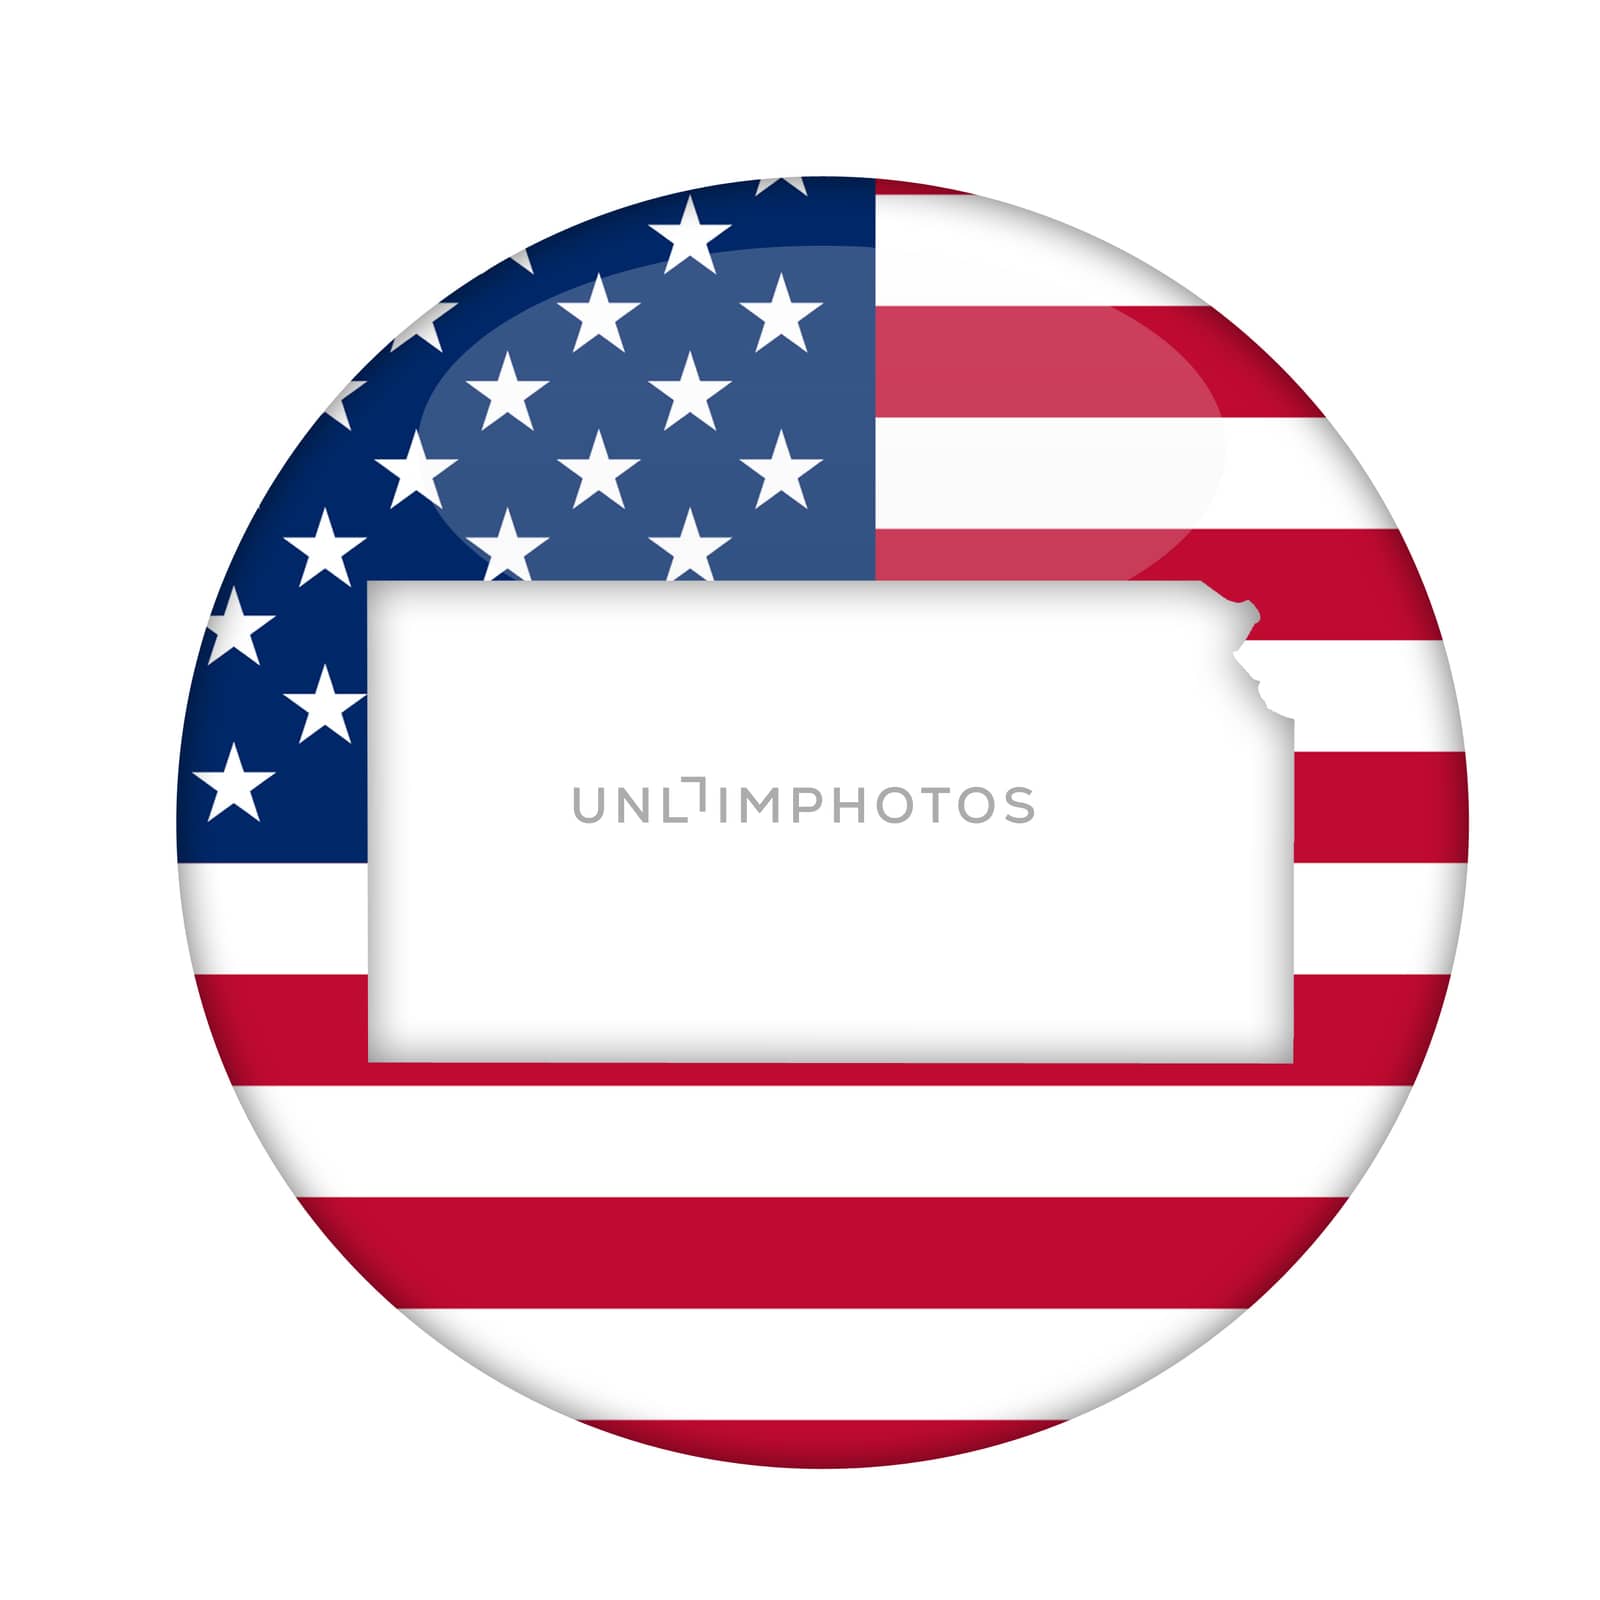 Kansas state of America badge isolated on a white background.